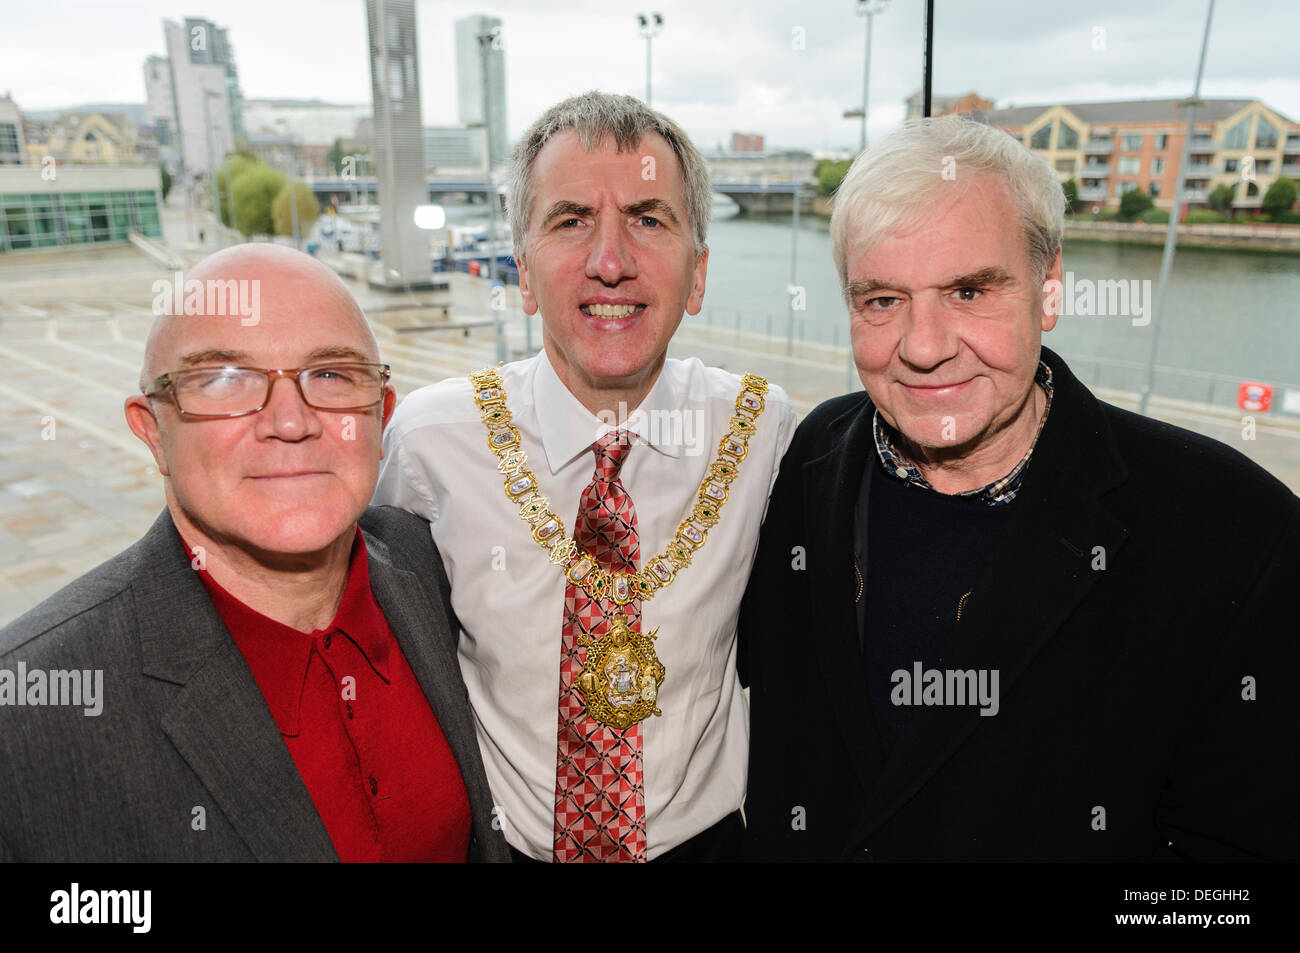 Belfast, Northern Ireland. 18th September 2013 - Music journalist and BBC Radio Ulster presenter Stuart Bailie, Lord Mayor of Belfast Mairtin O'Muilleoir and music promoter Terry Hooley at the launch of Belfast Music Week (11-17th November 2013) Credit:  Stephen Barnes/Alamy Live News Stock Photo